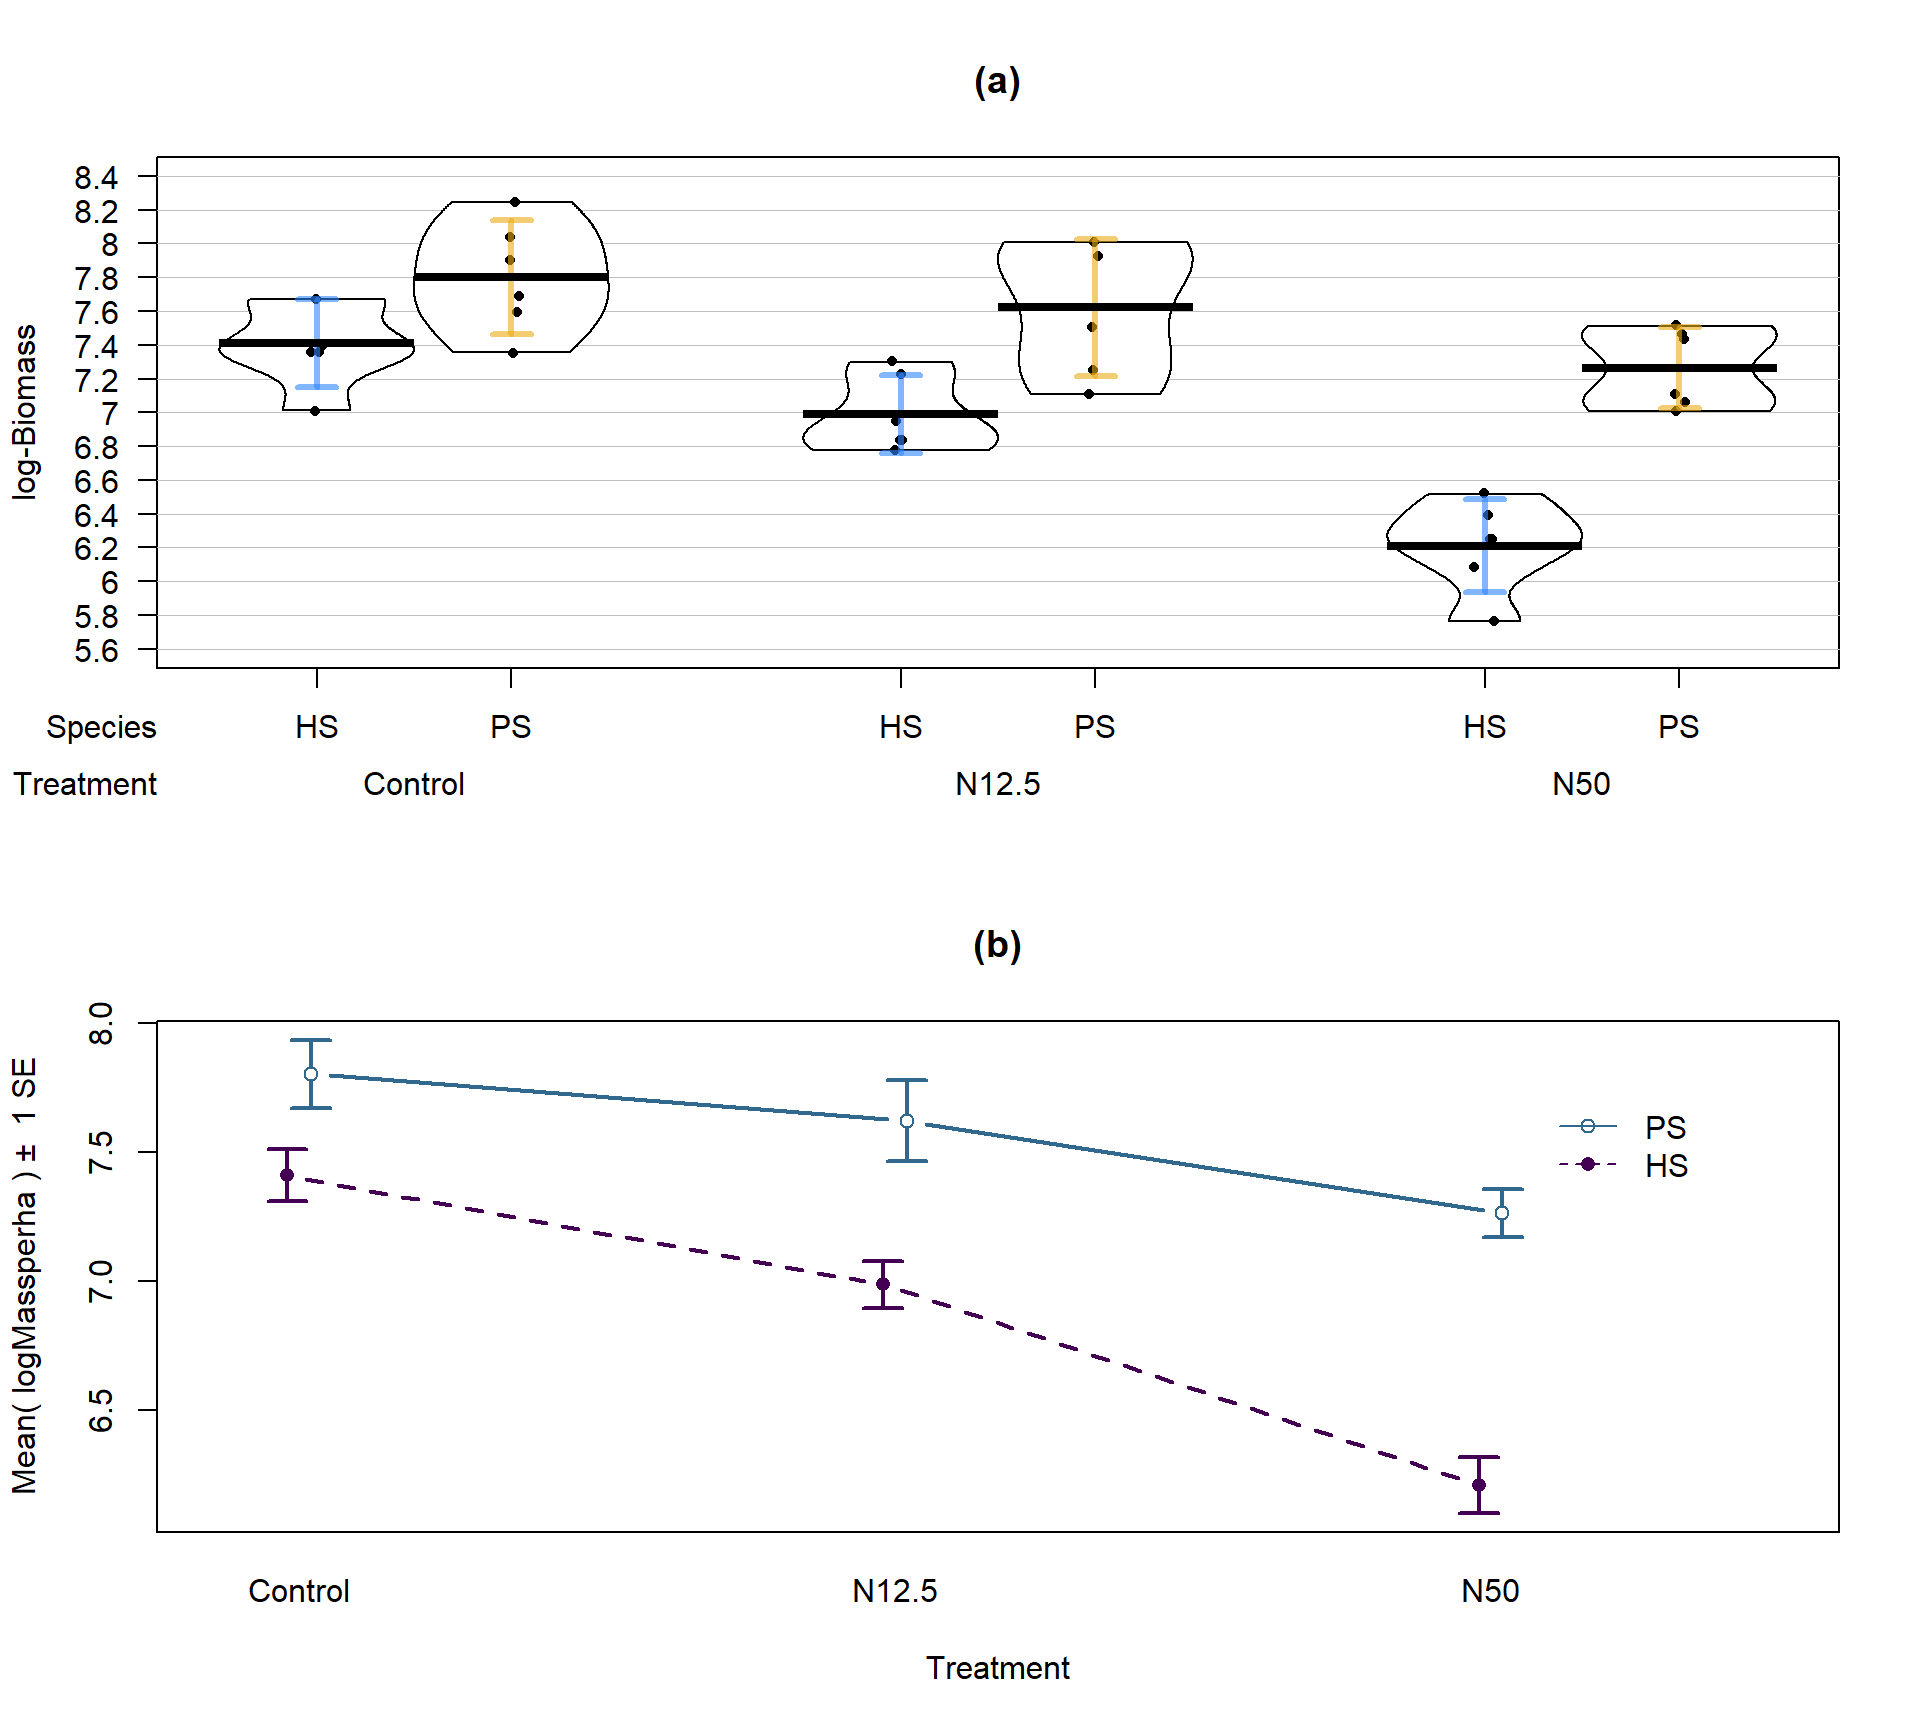 Pirate-plot and interaction plot of the log-Biomass responses by treatment and species.